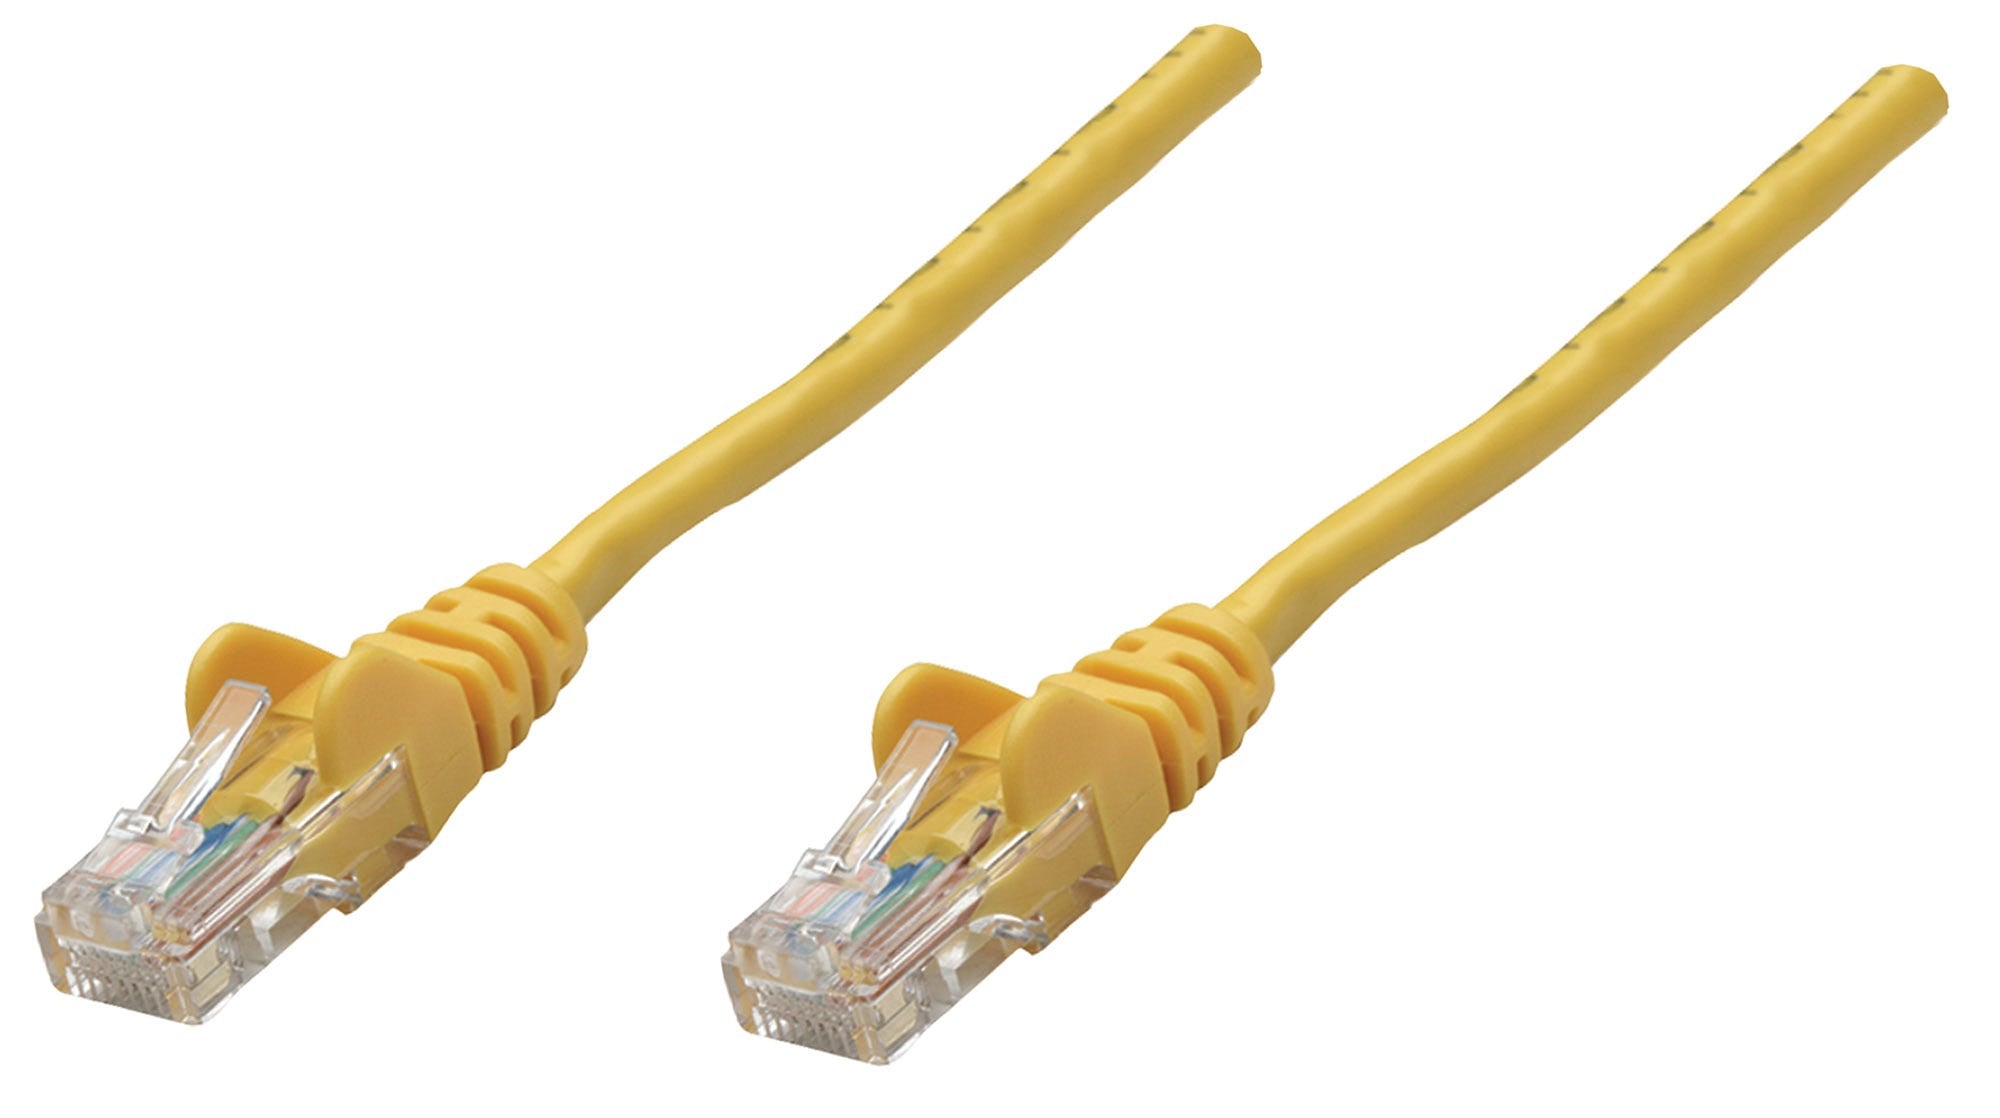 Intellinet Network Patch Cable, Cat5e, 0.25m, Yellow, CCA, U/UTP, PVC, RJ45, Gold Plated Contacts, Snagless, Booted, Lifetime Warranty, Polybag